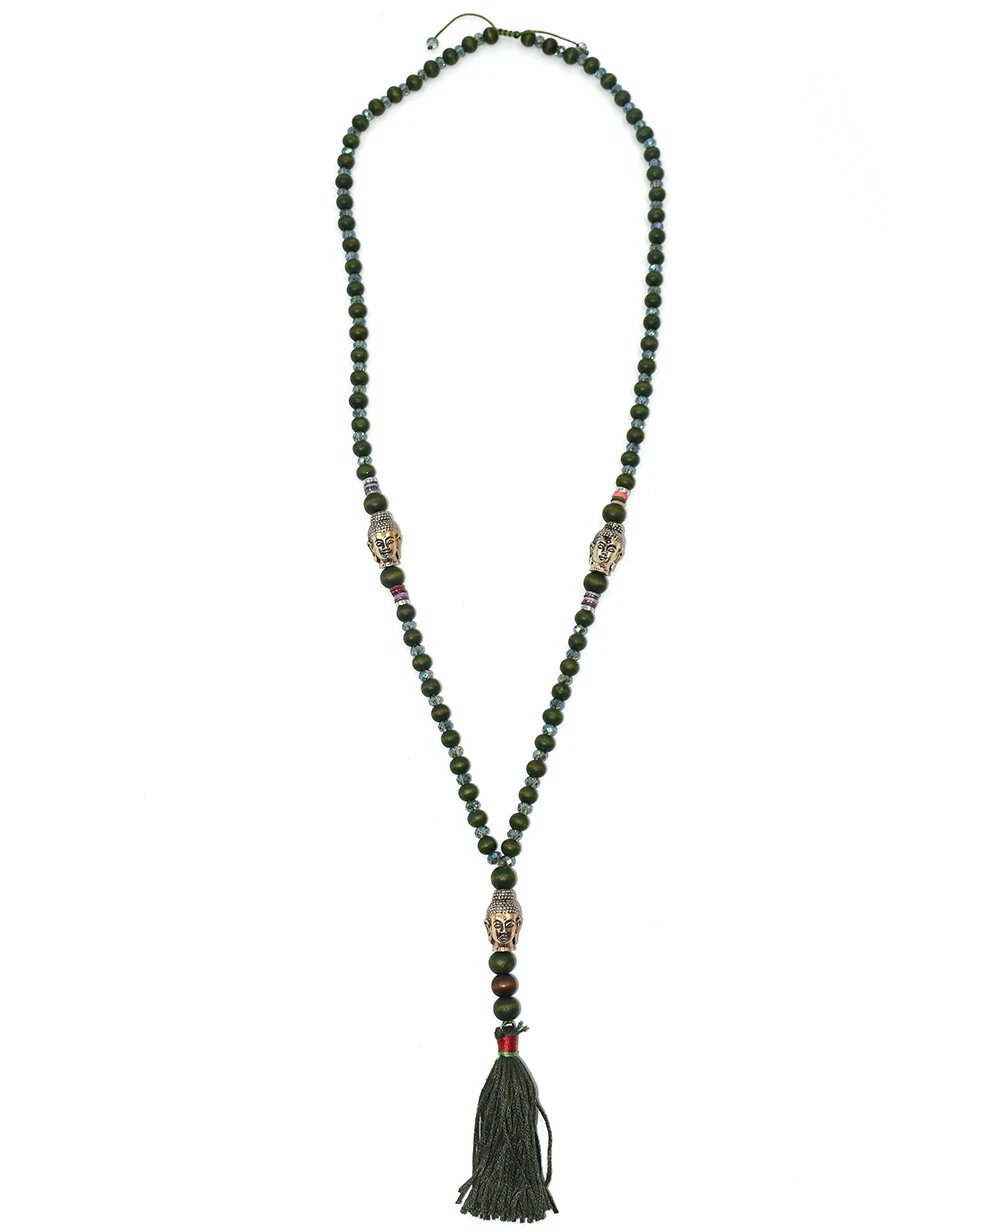 Handmade vintage rosary crystal beads chian necklace tassel Buddha pendent necklace tibetan Buddha Buddhism Olive color necklace